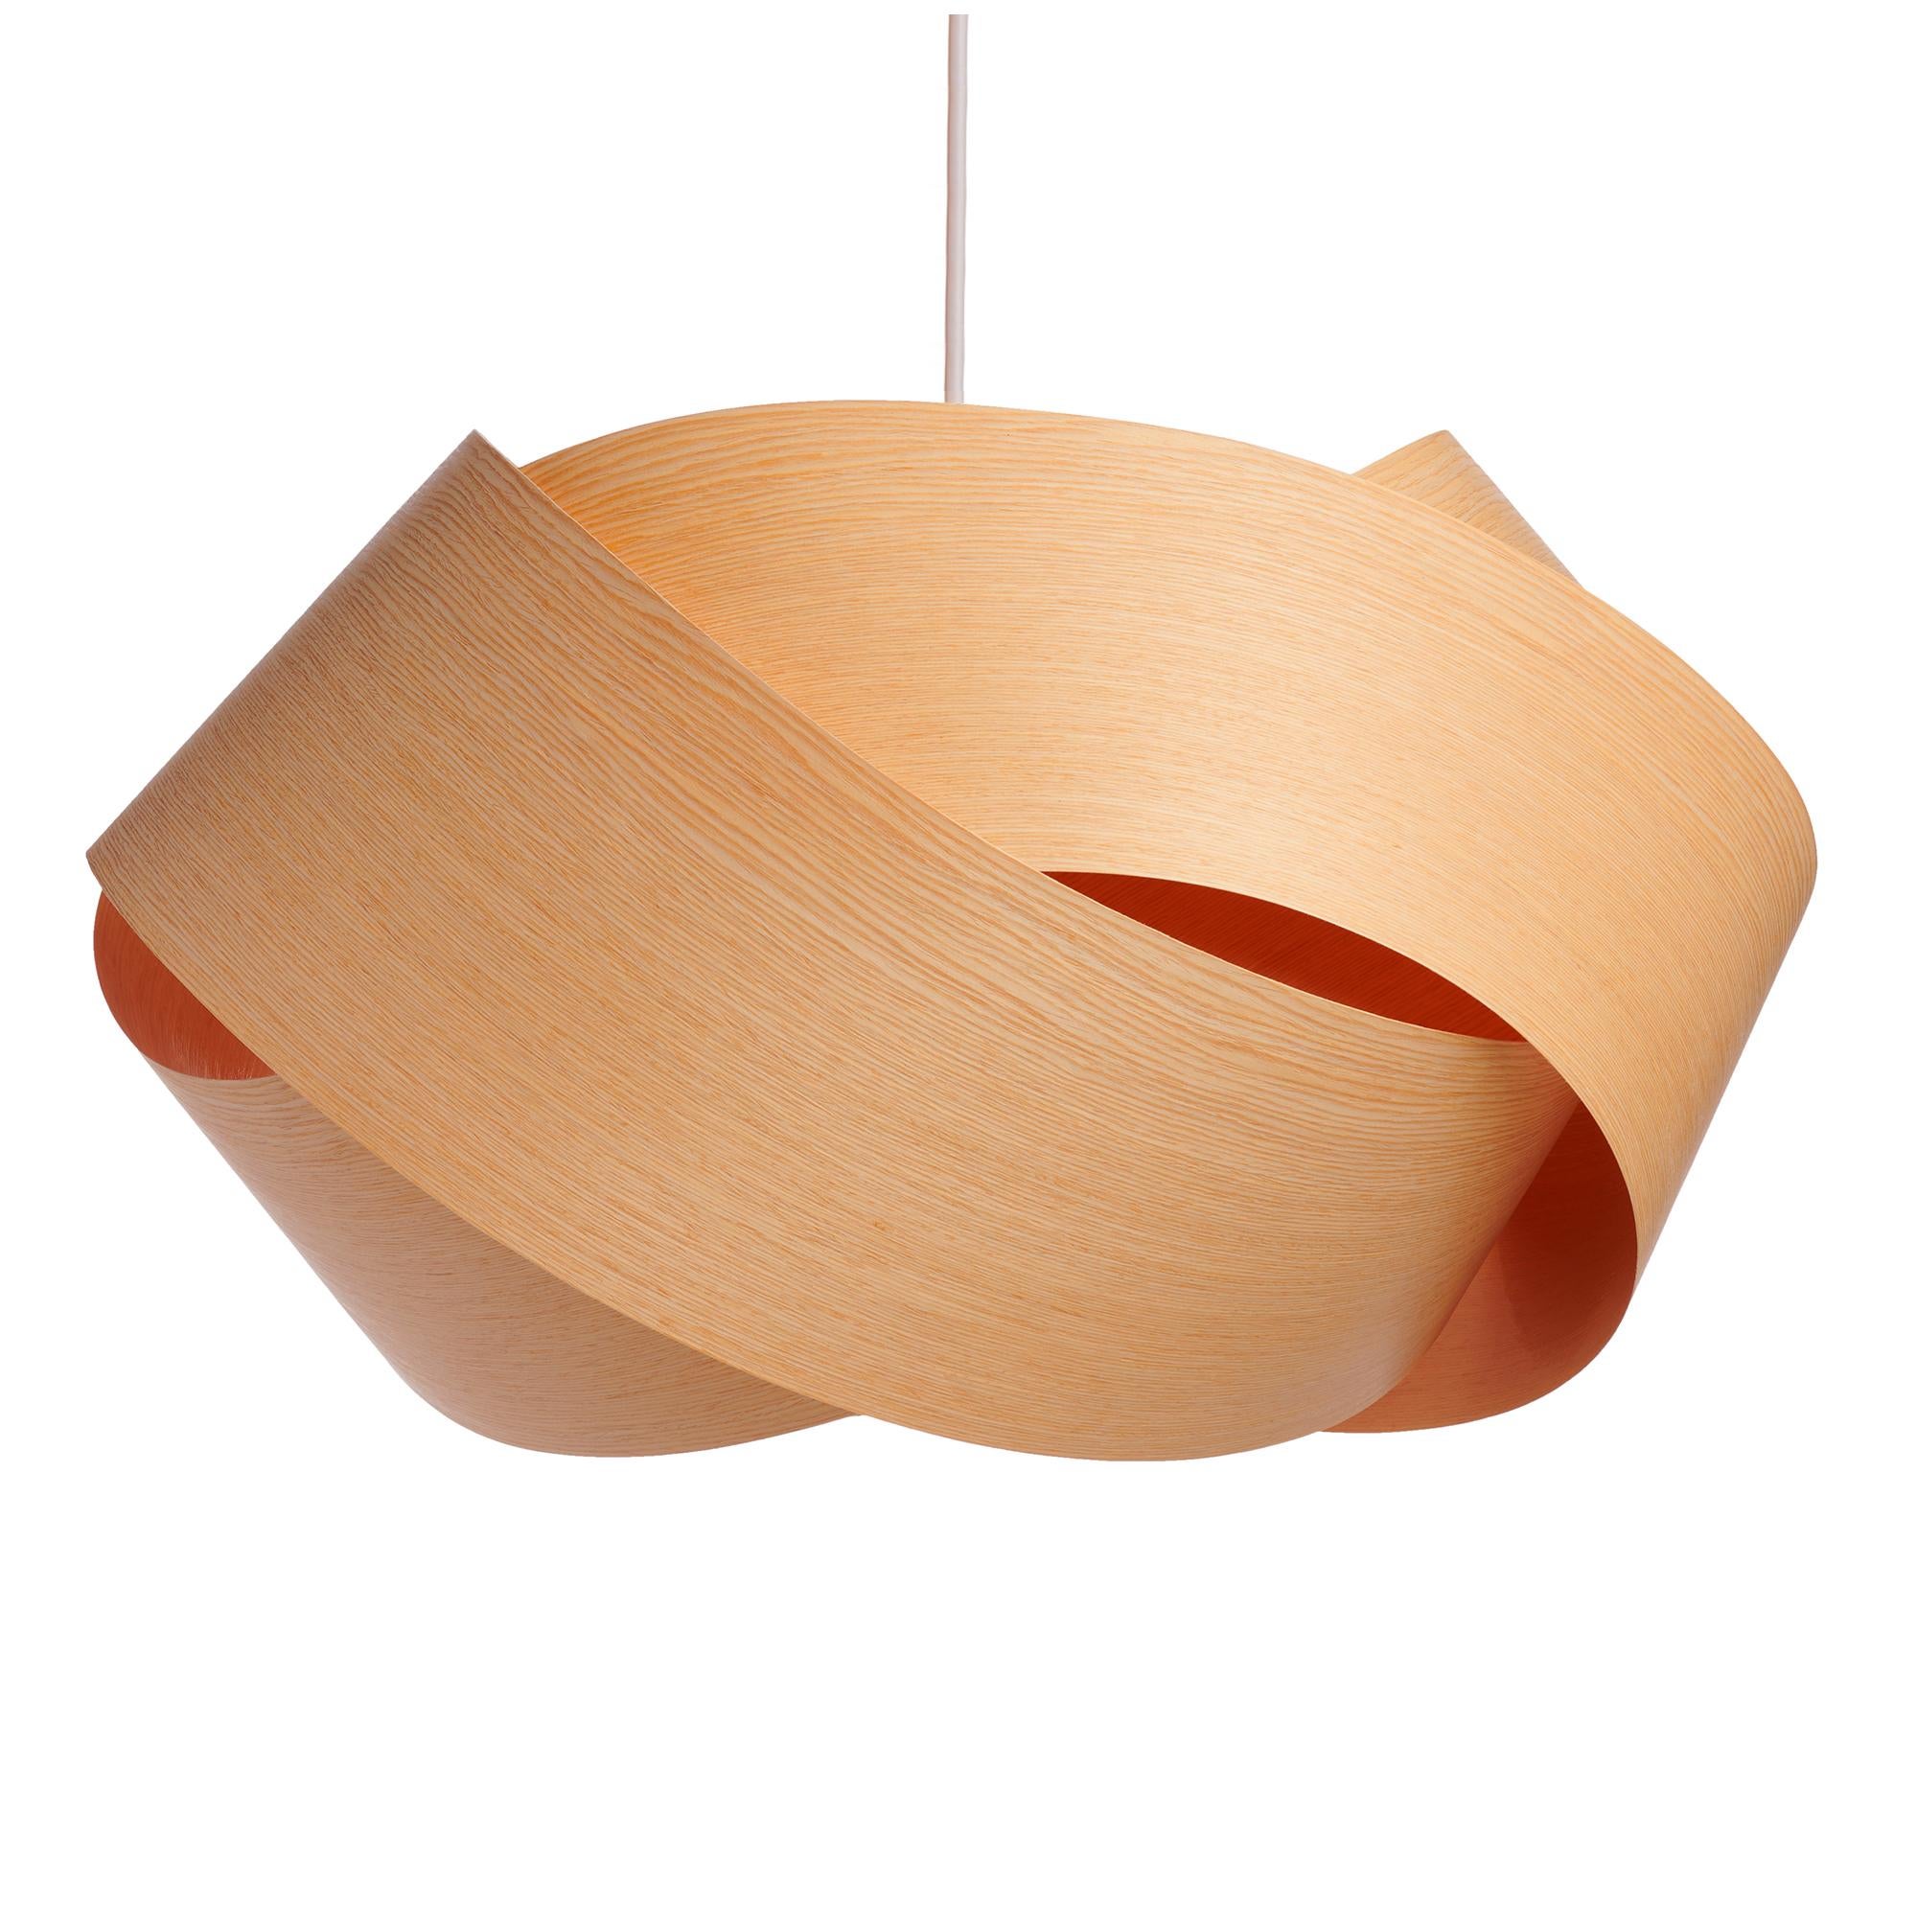 SERENE is a contemporary, Mid-Century Modern light fixture with a Scandinavian Design and Organic Modern composition. This is a minimalist luxury wood veneer pendant design and can be exhibited in annexes, entrance ways, and offices. 
Newood is made